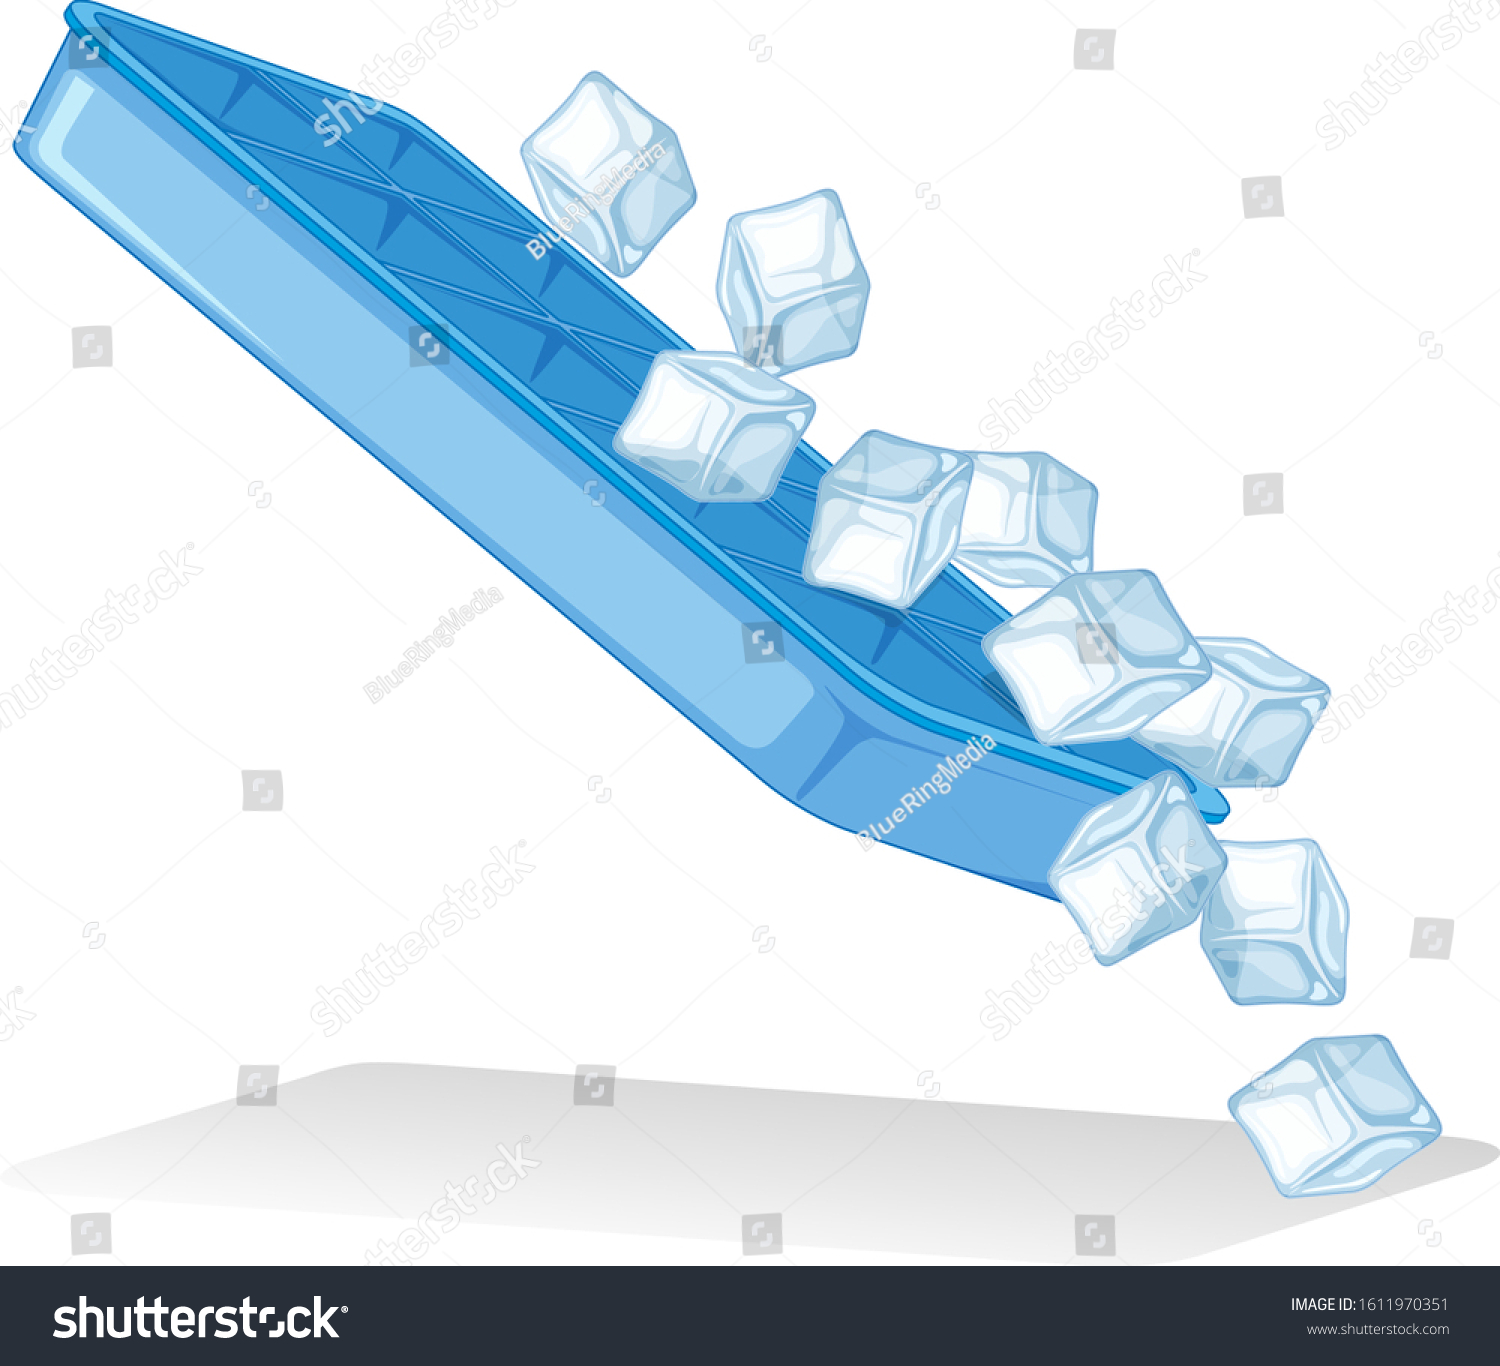 SVG of Ice cubes from ice tray on white background illustration svg